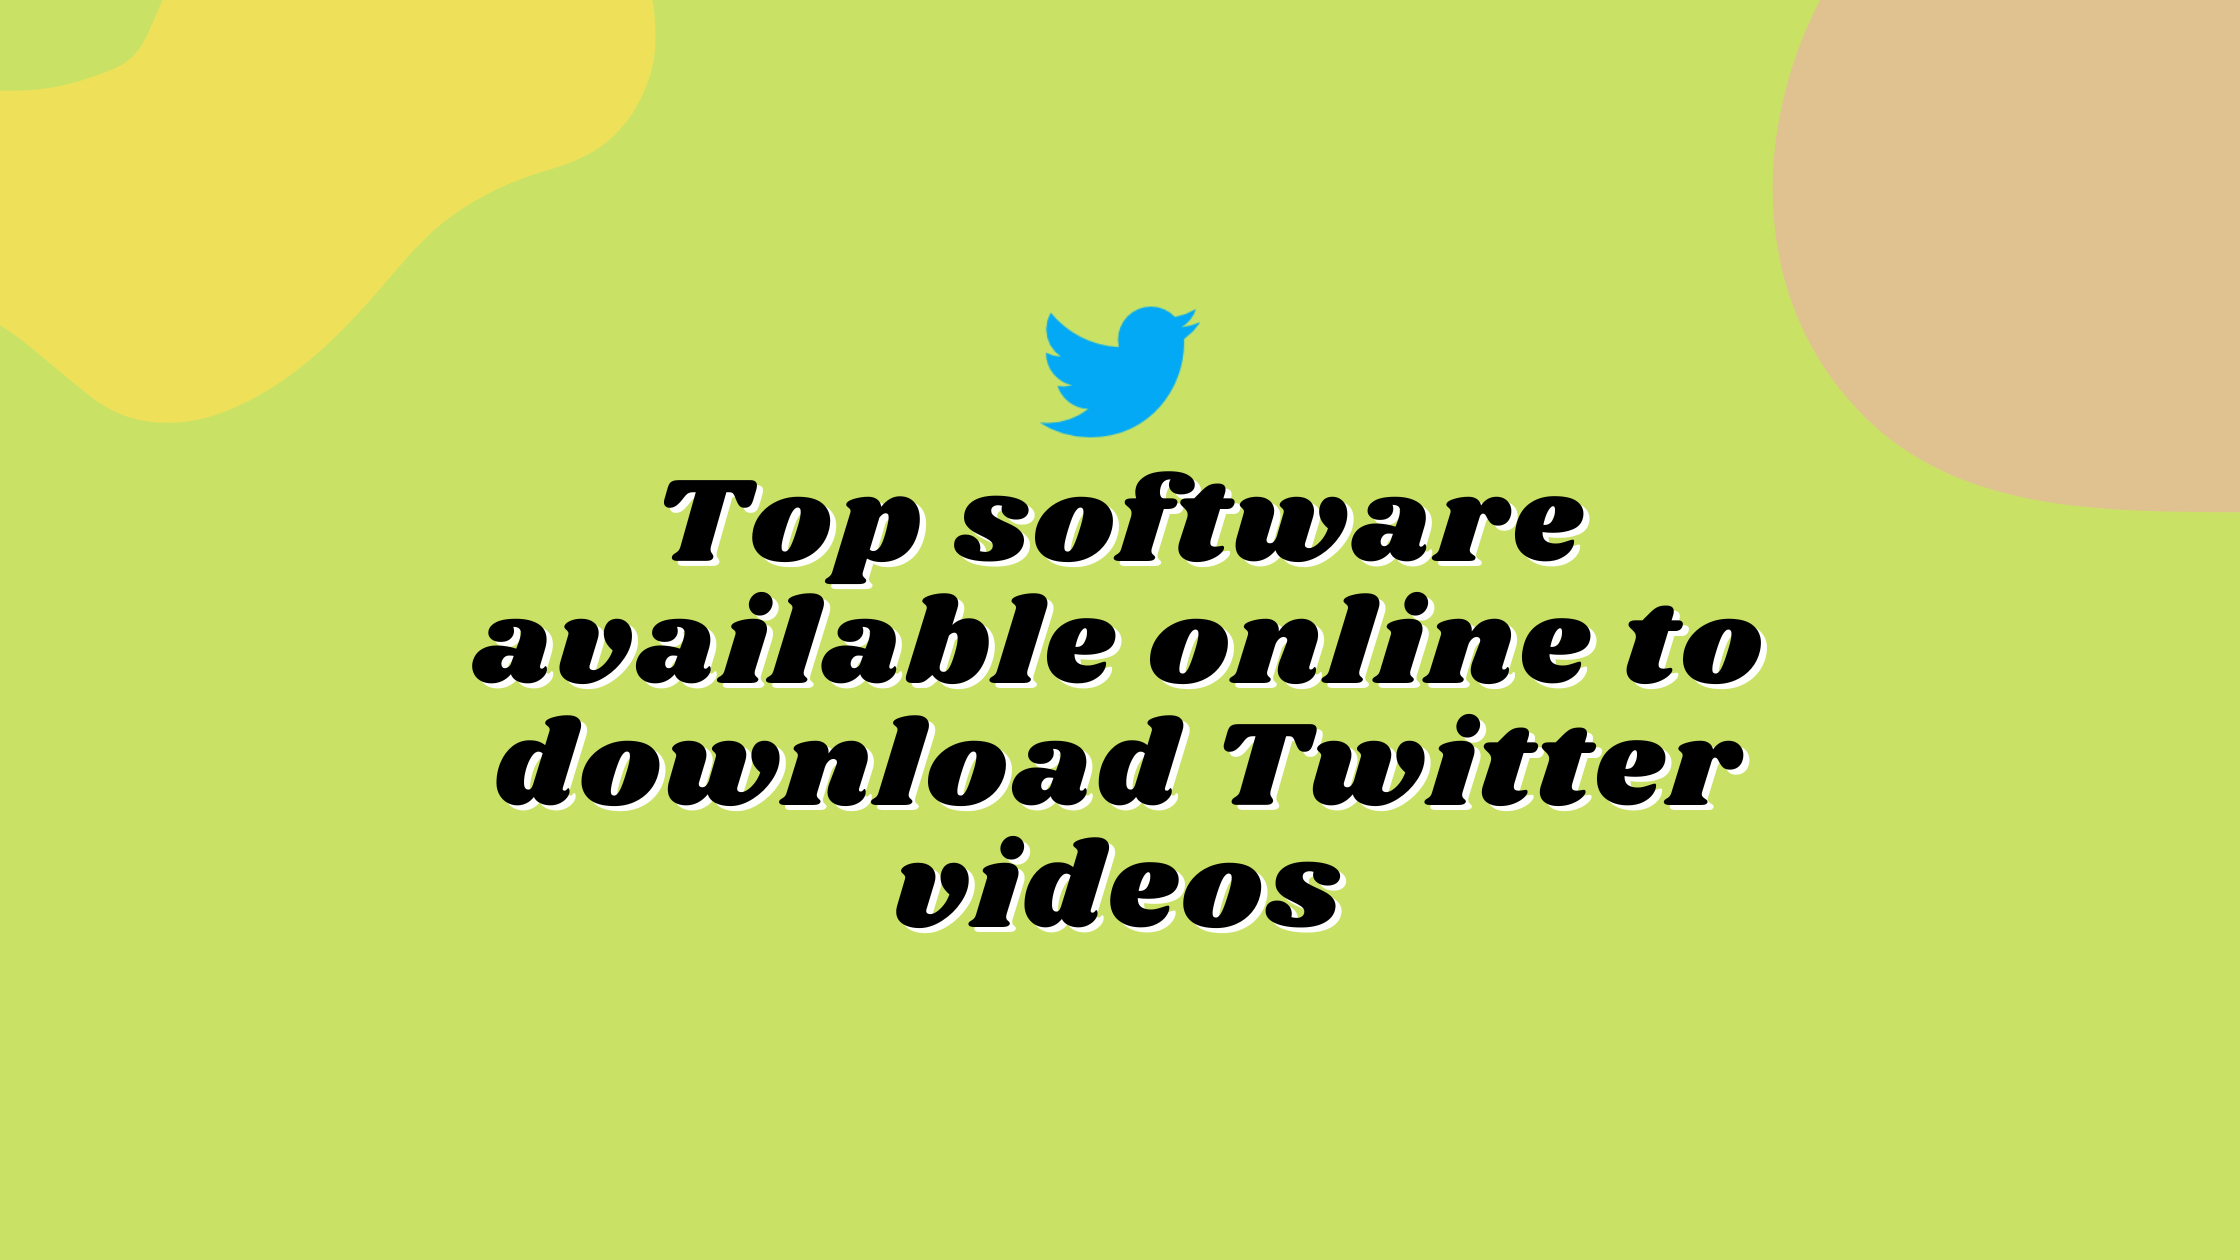 Top software available online to download Twitter videos